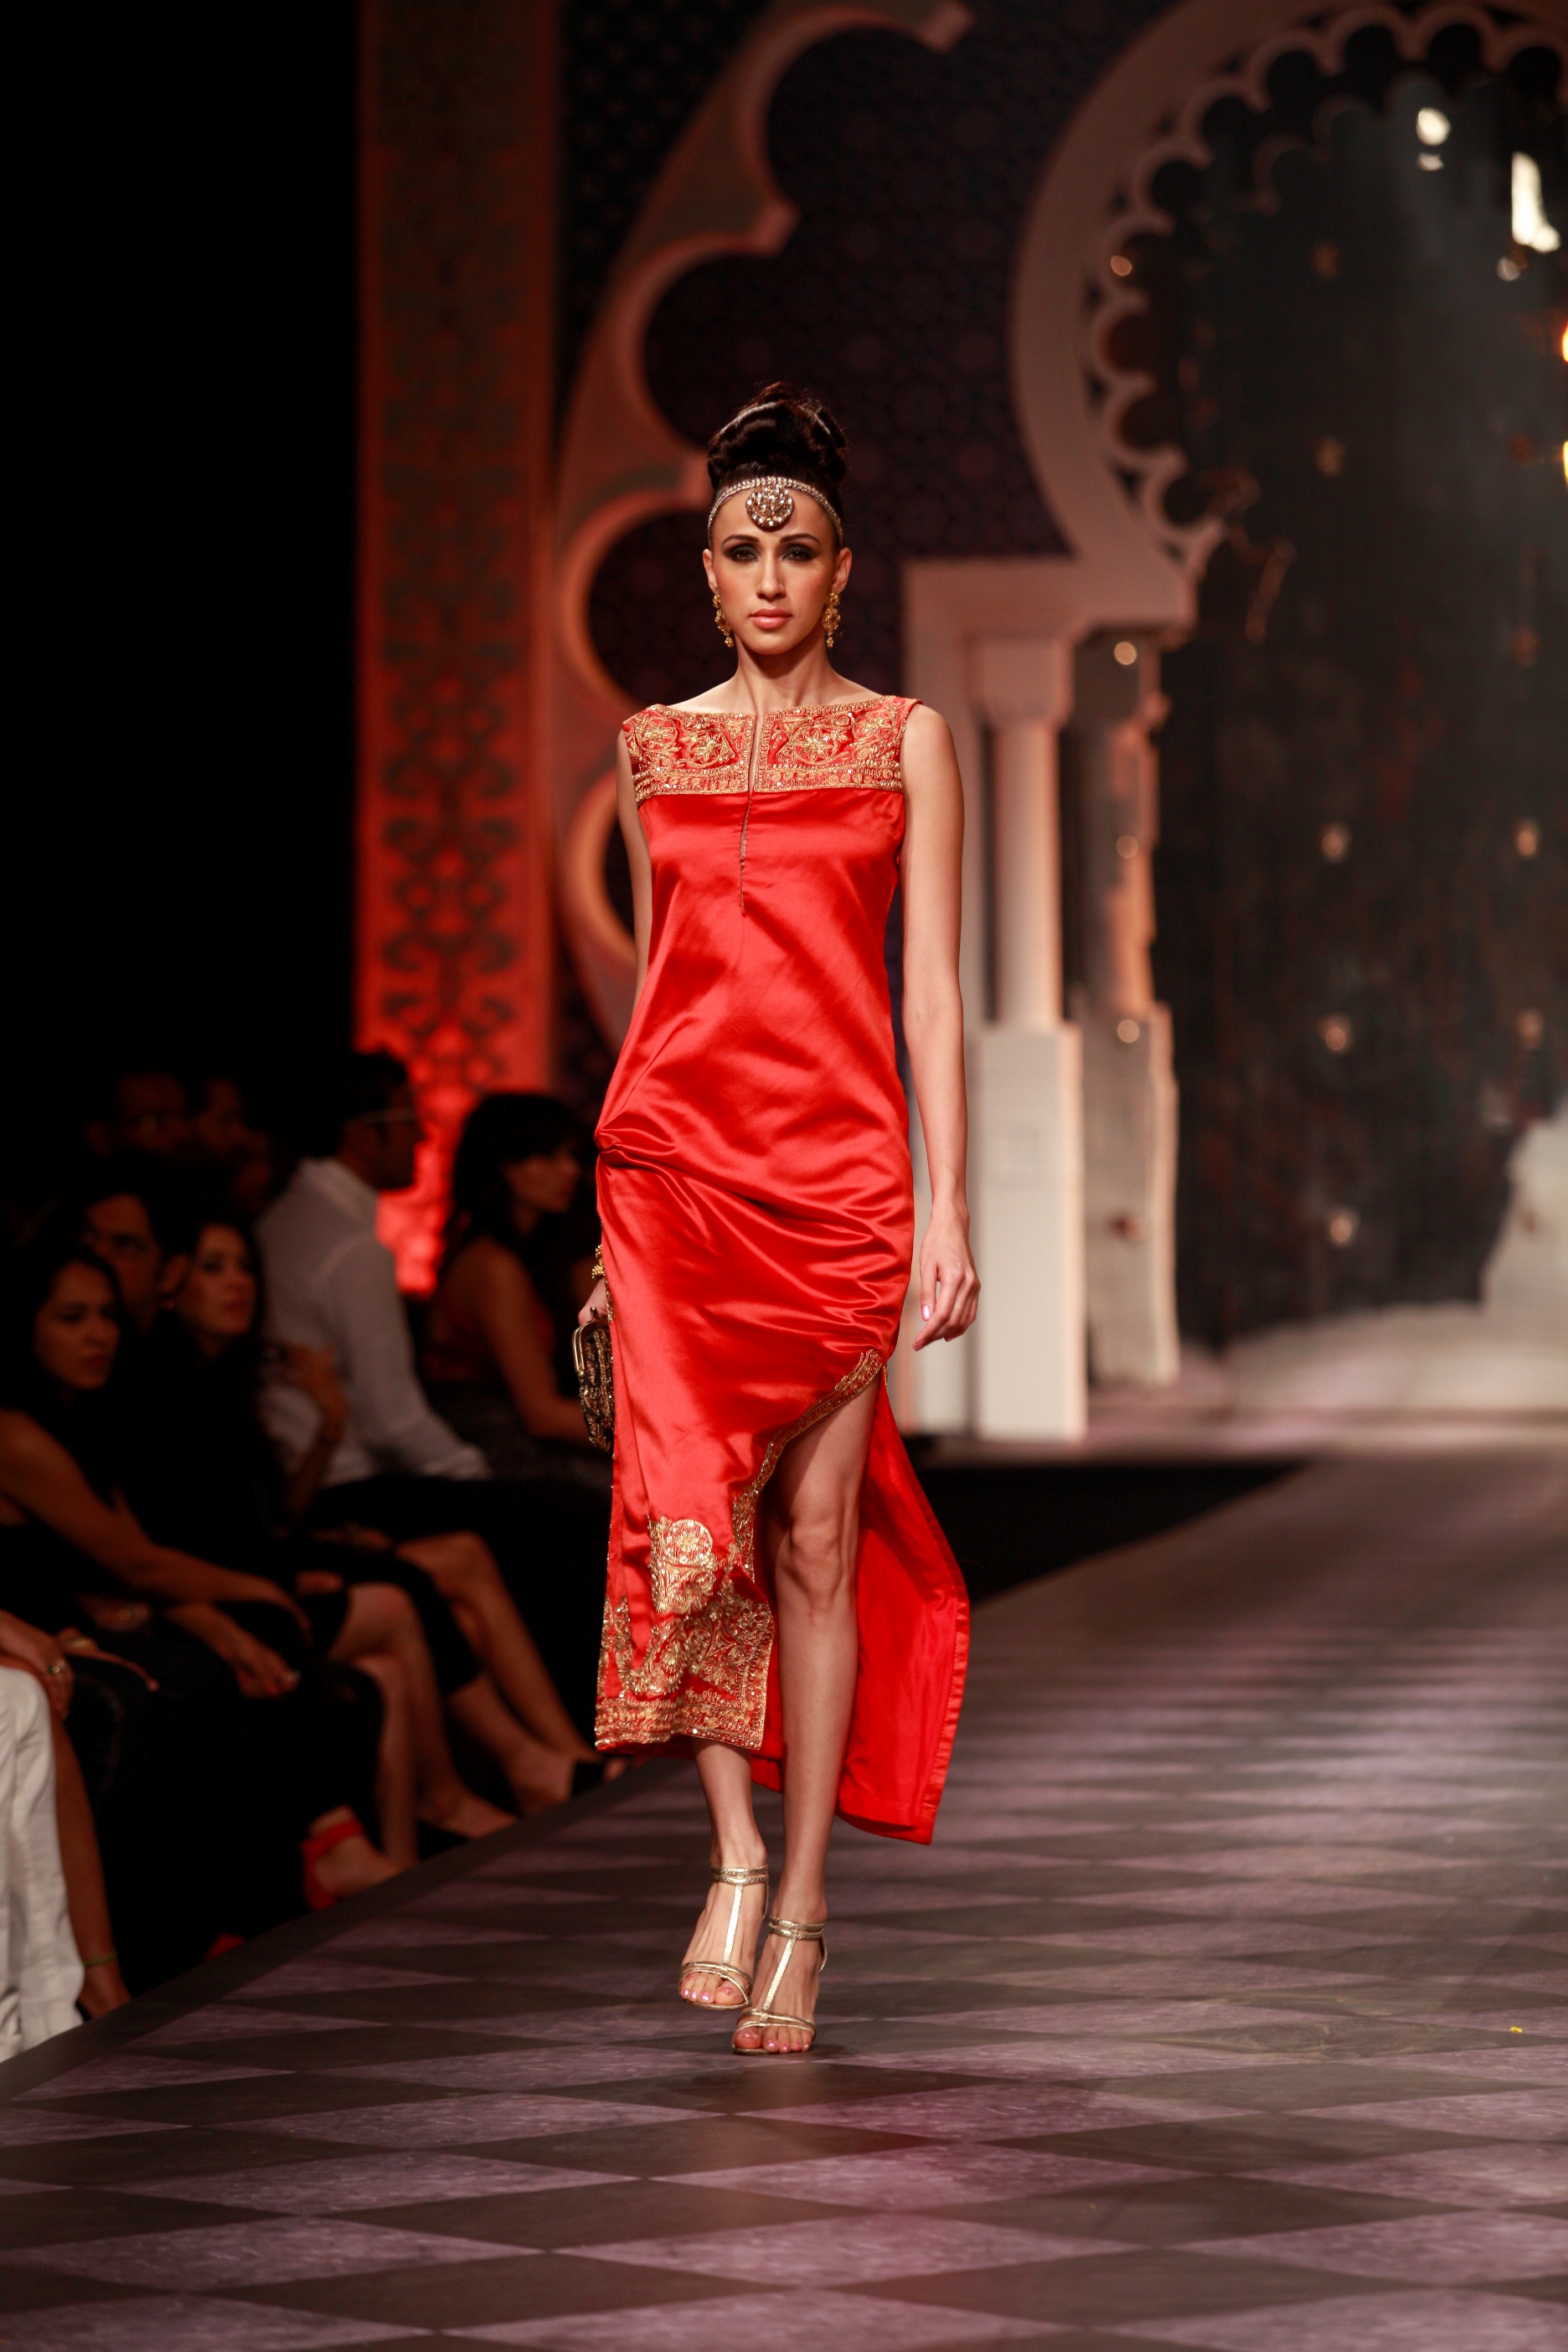 Seen at Aamby Valley India Bridal Fashion Week - Day 3- Model in a Raghavendra Rathore creation 2